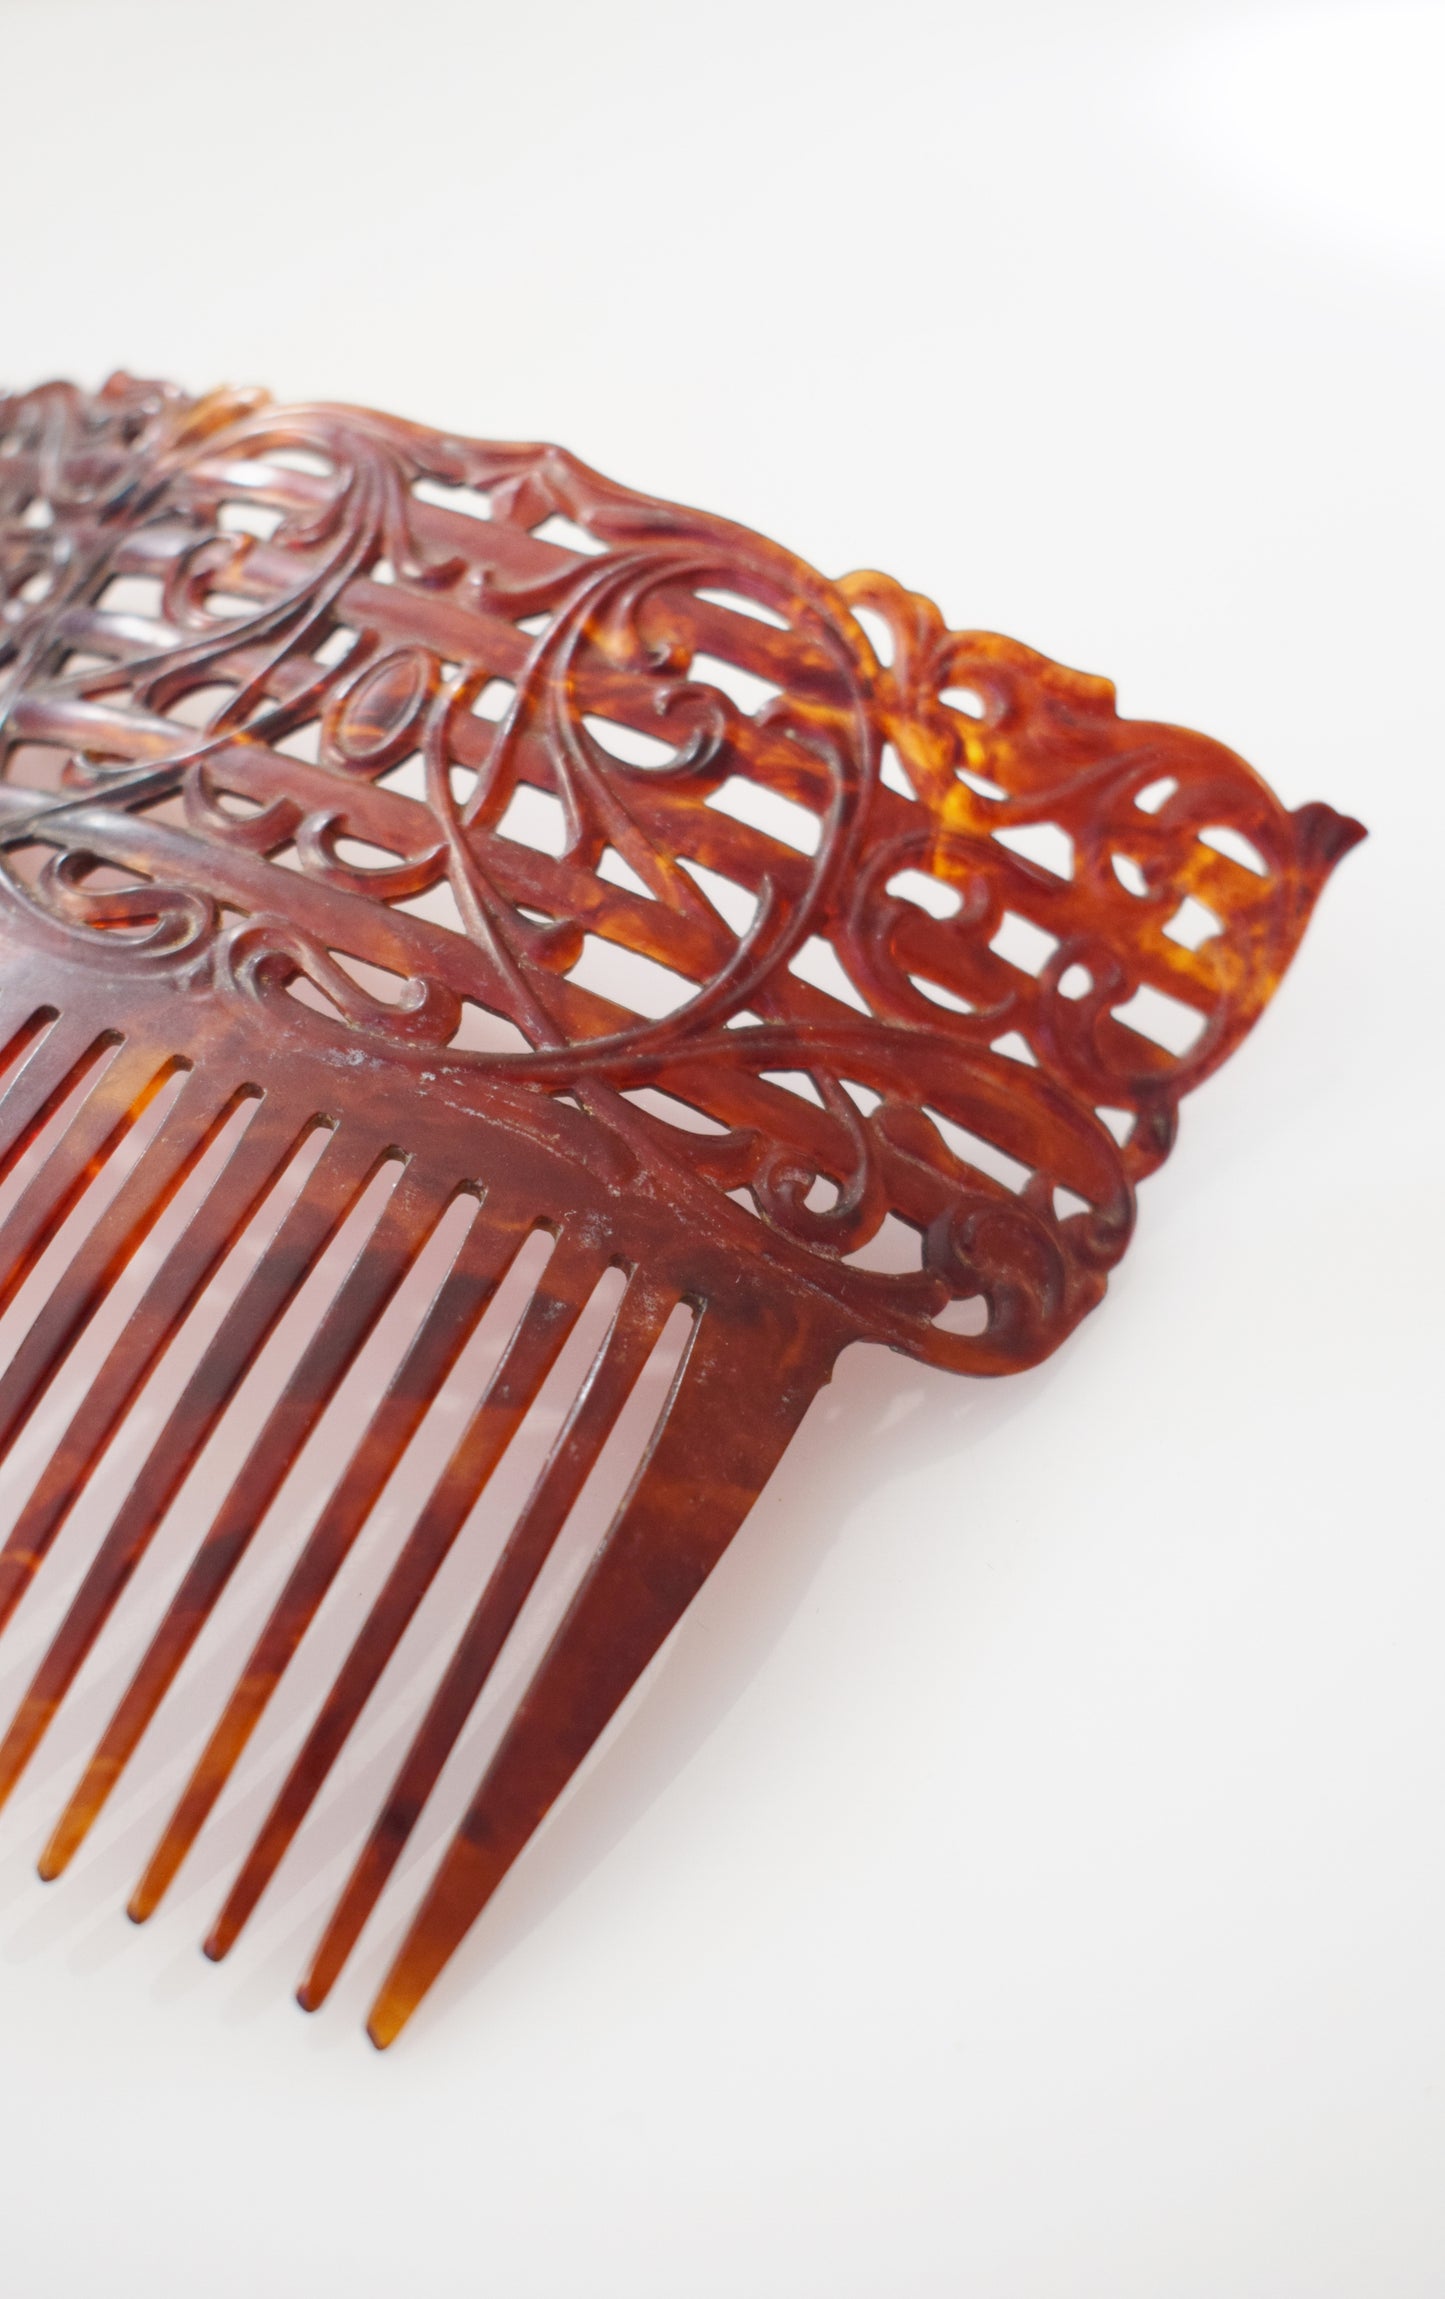 Large Antique Carved Celluloid Haircomb